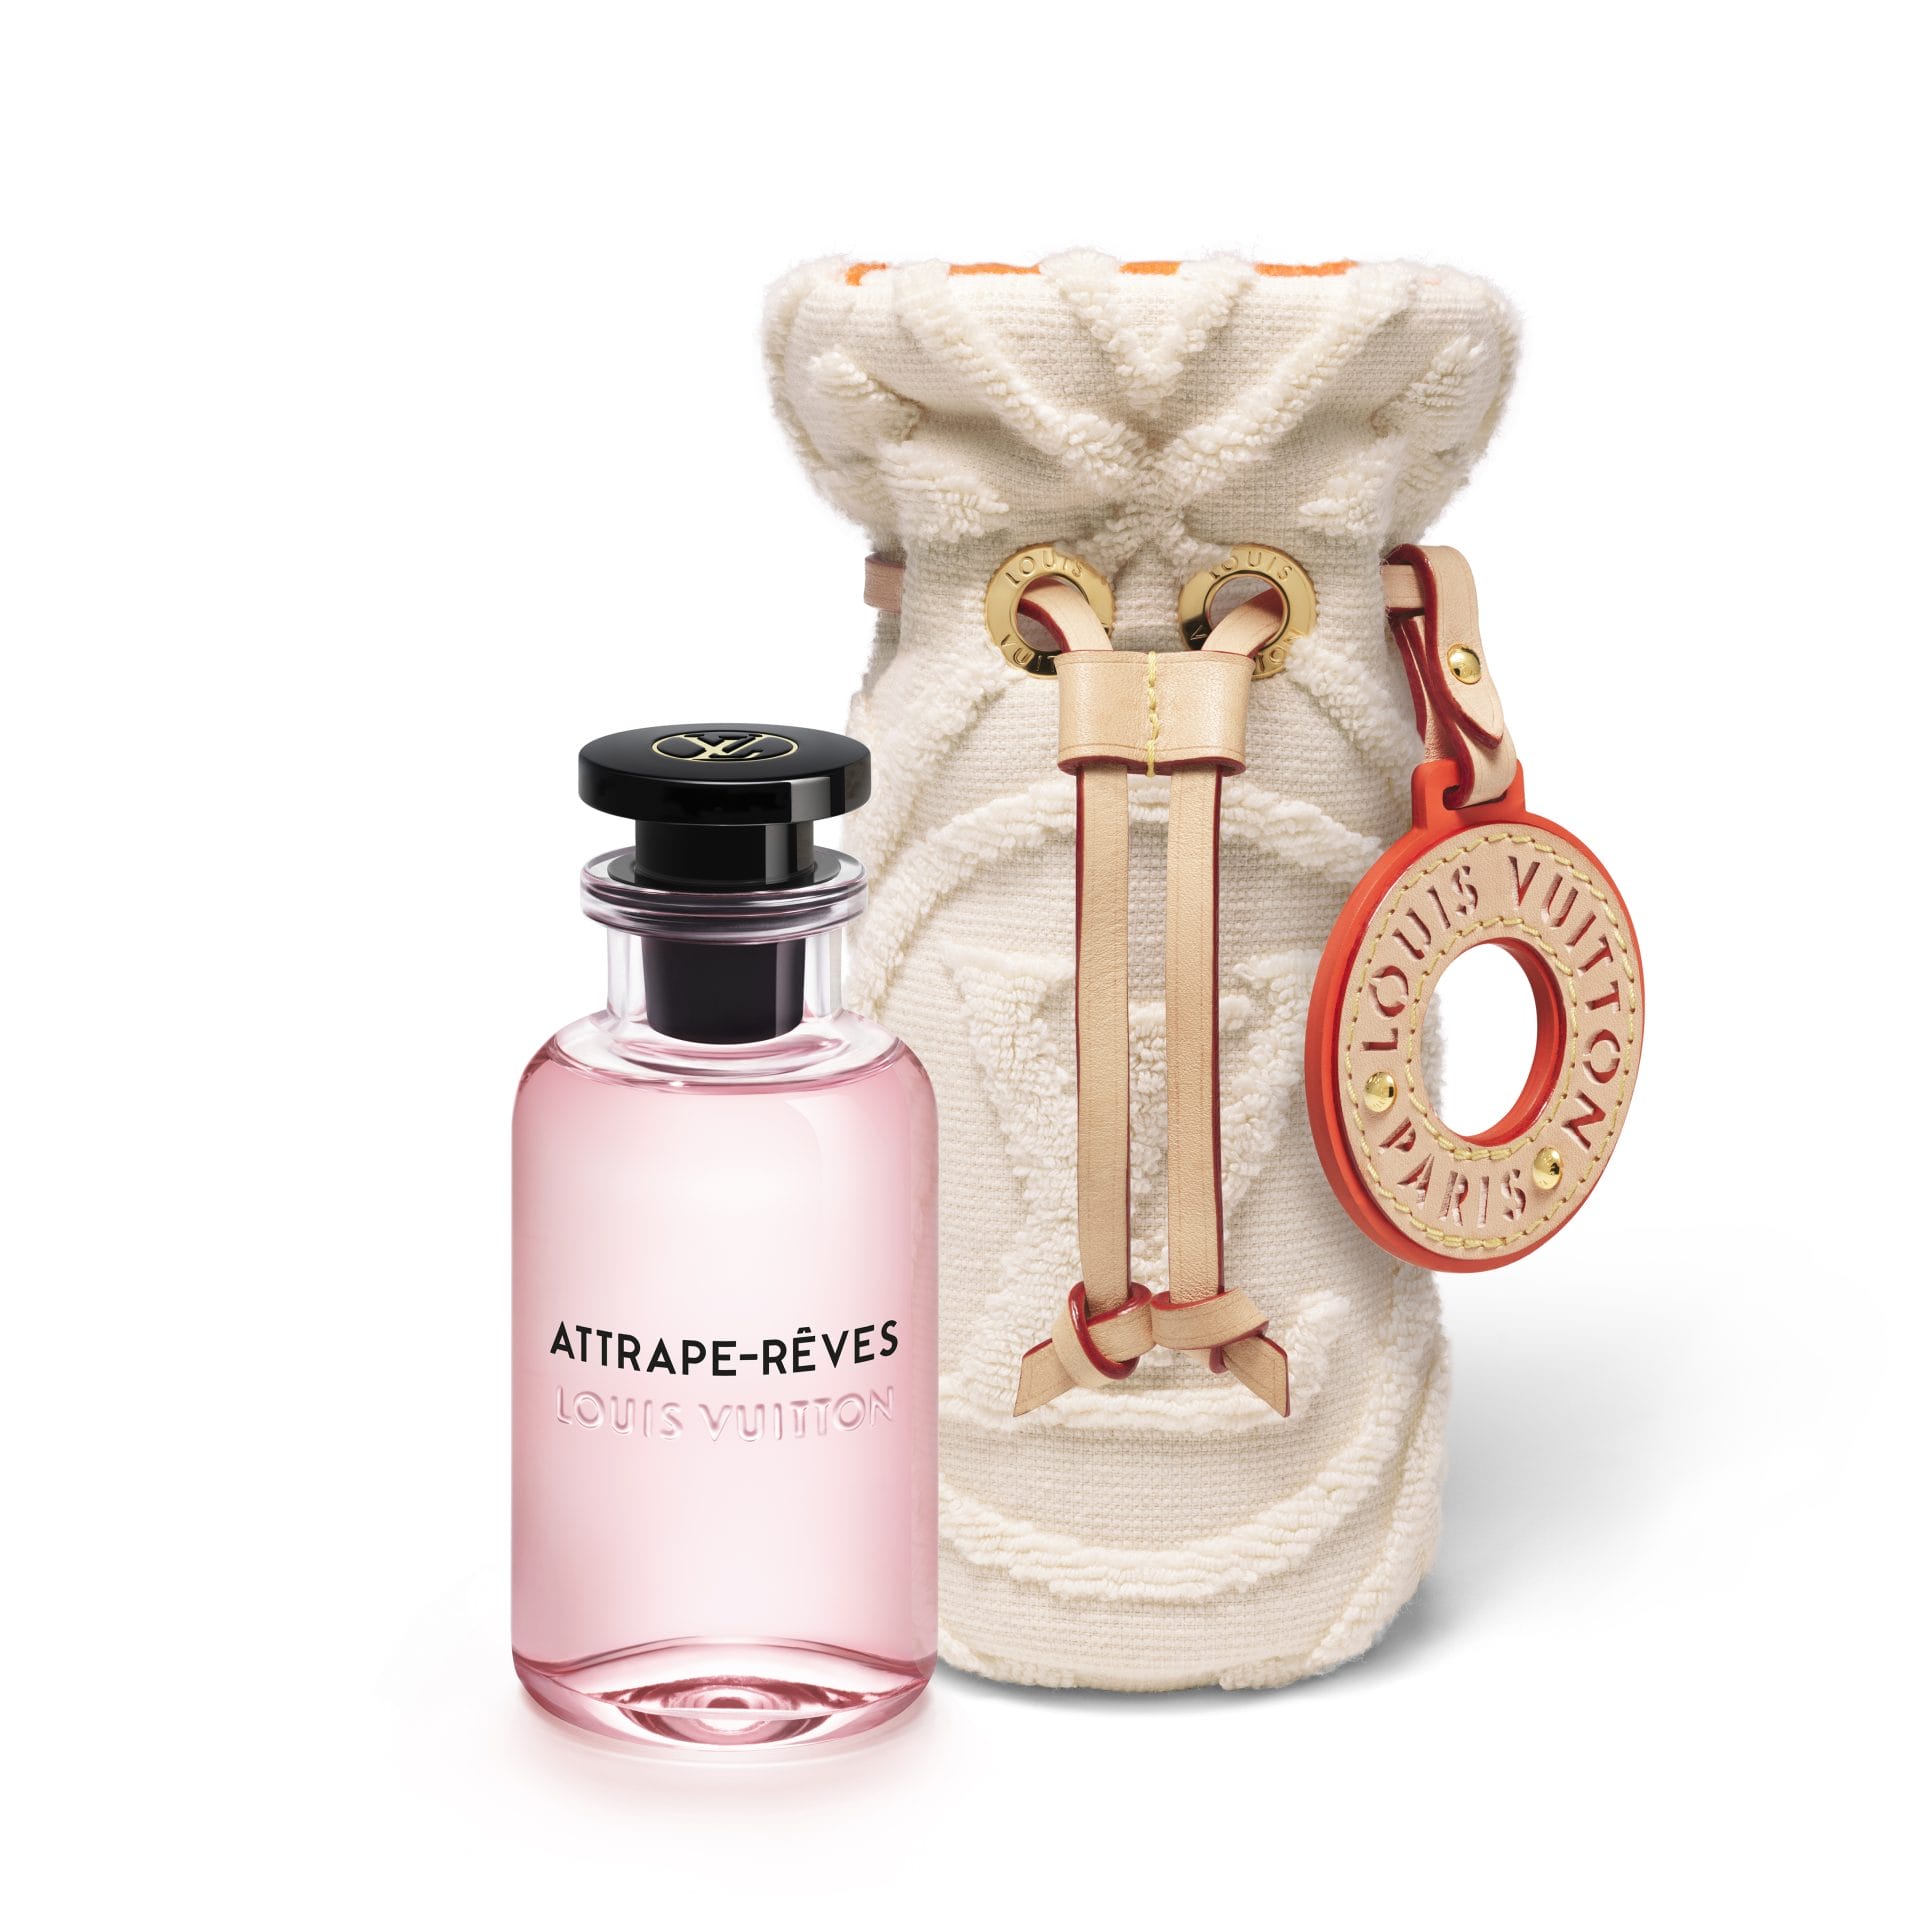 by the pool fragrance pouch attrape reves